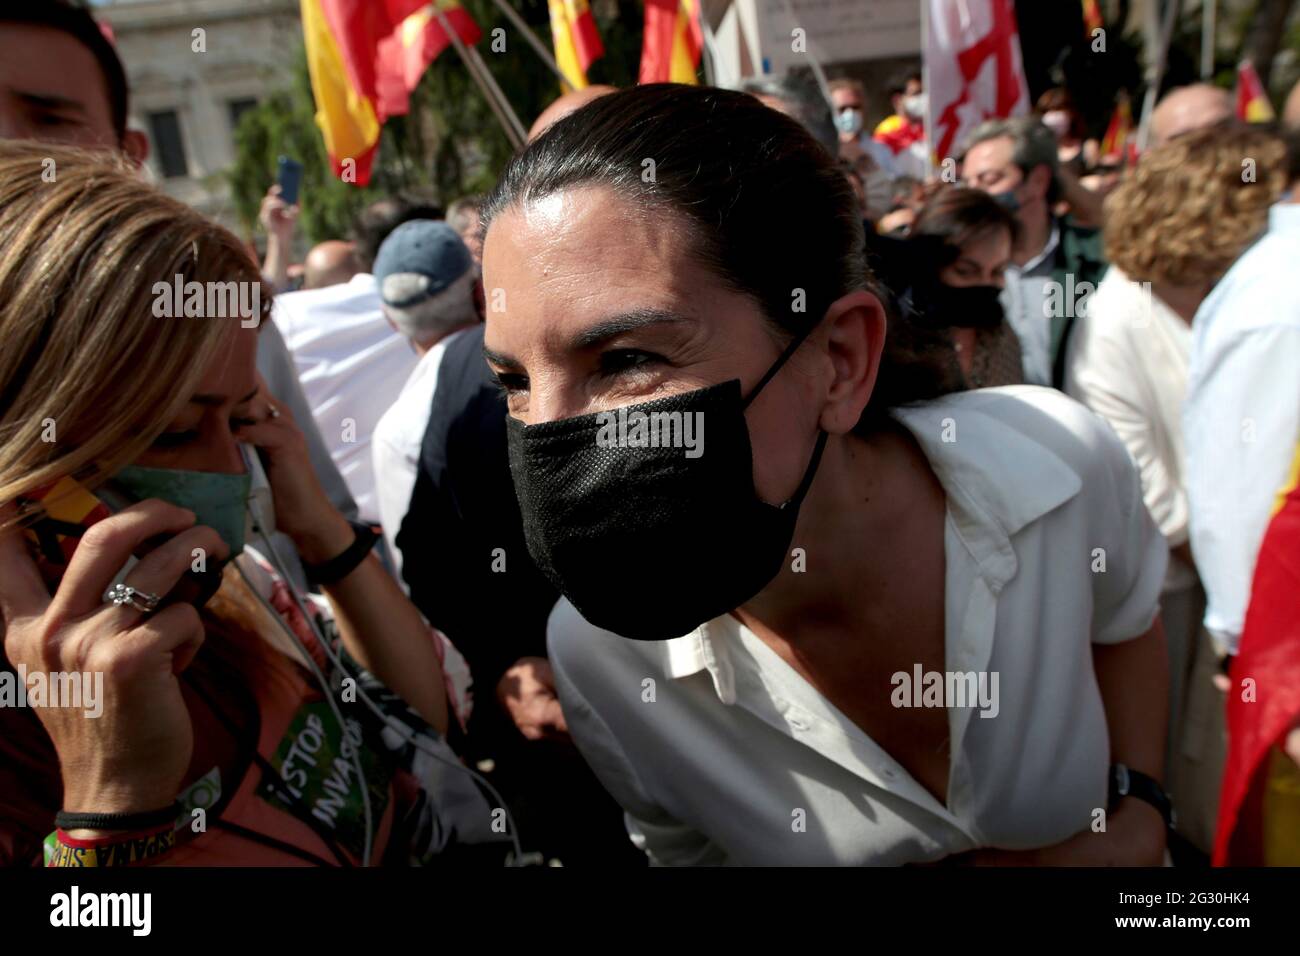 Madrid, Spain; 13.06.2021.- Rocío Monasterio, deputy of the extreme right party Vox at the monument to the Spanish admiral Blas de Lezo, who was one-eyed, lame and one-eyed. 'Unión 78' platform led by the Spanish politician Rosa Díez, the group that convened the meeting of the far-right in the Plaza de Colón in Madrid, to protest the possible pardons to the imprisoned Catalan independence politicians. Among thousands of people who filled the square and the adjacent streets with Spanish flags, the attendees shouted slogans such as 'Madrid will be the tomb of Sanchismo' by the president of Spain Stock Photo